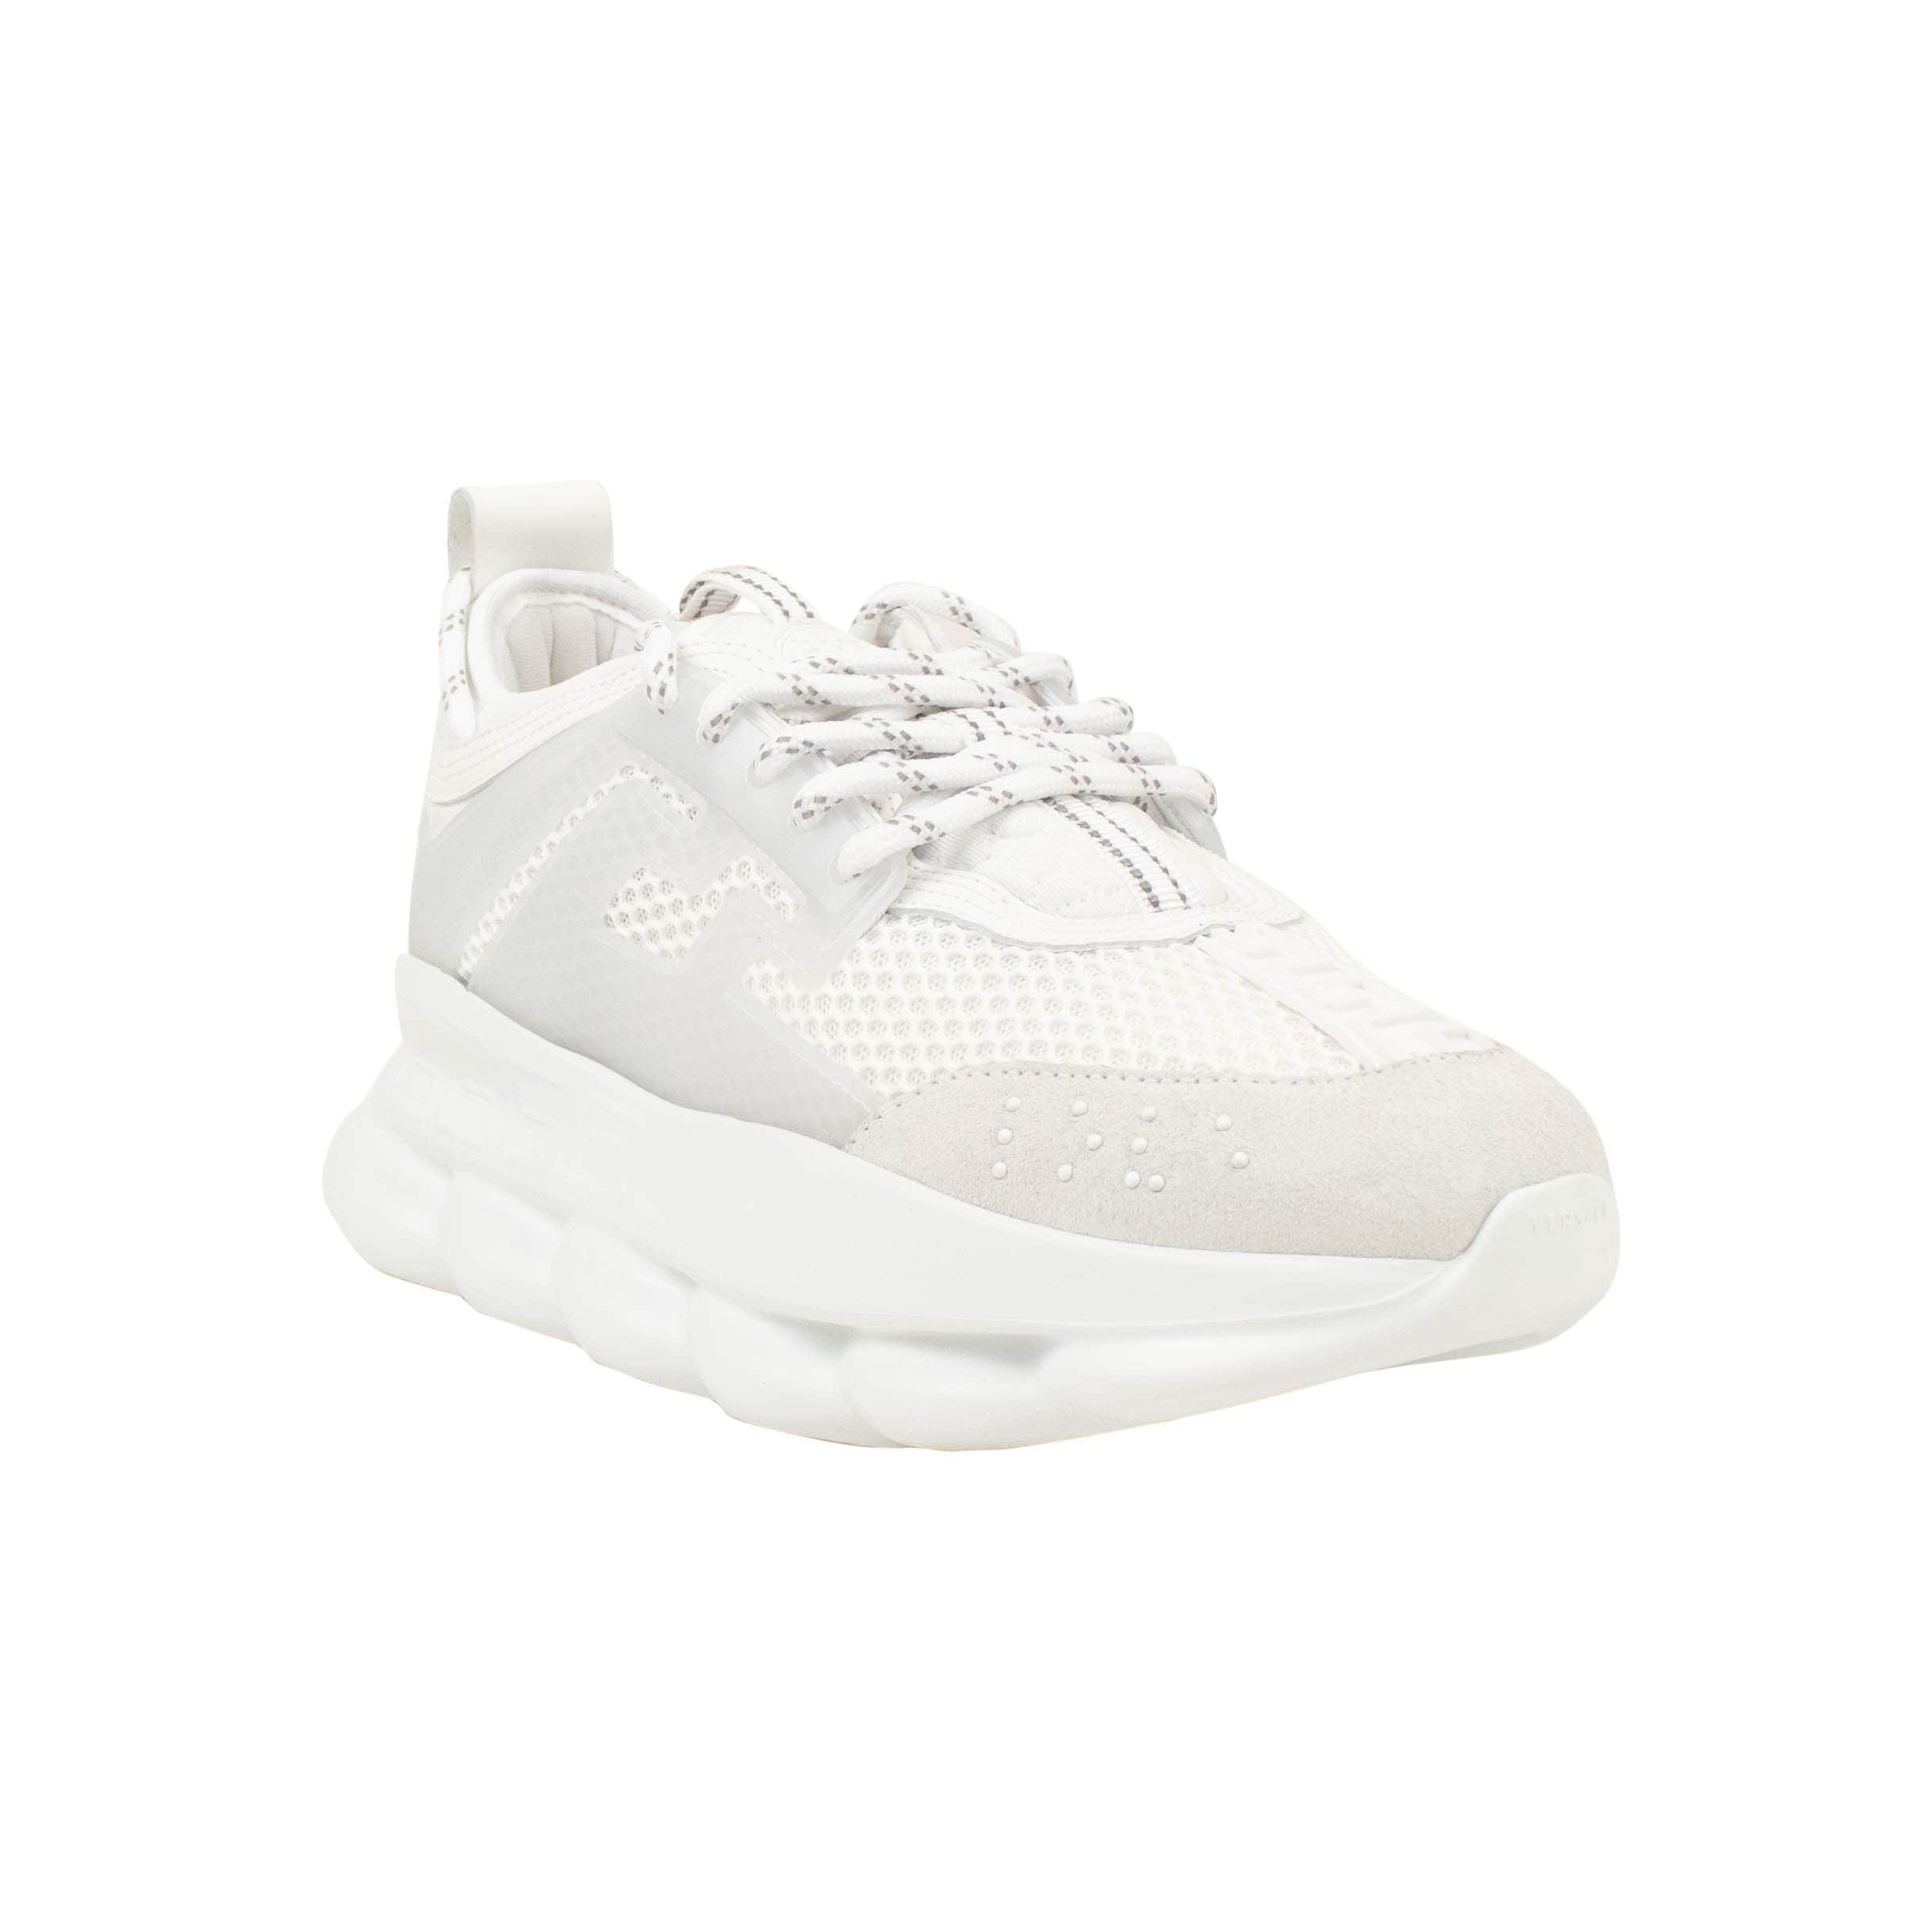 Versace 750-1000, channelenable-all, chicmi, couponcollection, gender-mens, main-shoes, mens-shoes, size-38, versace 38 White Chain Reaction Sneaker 92S-2033/38 92S-2033/38